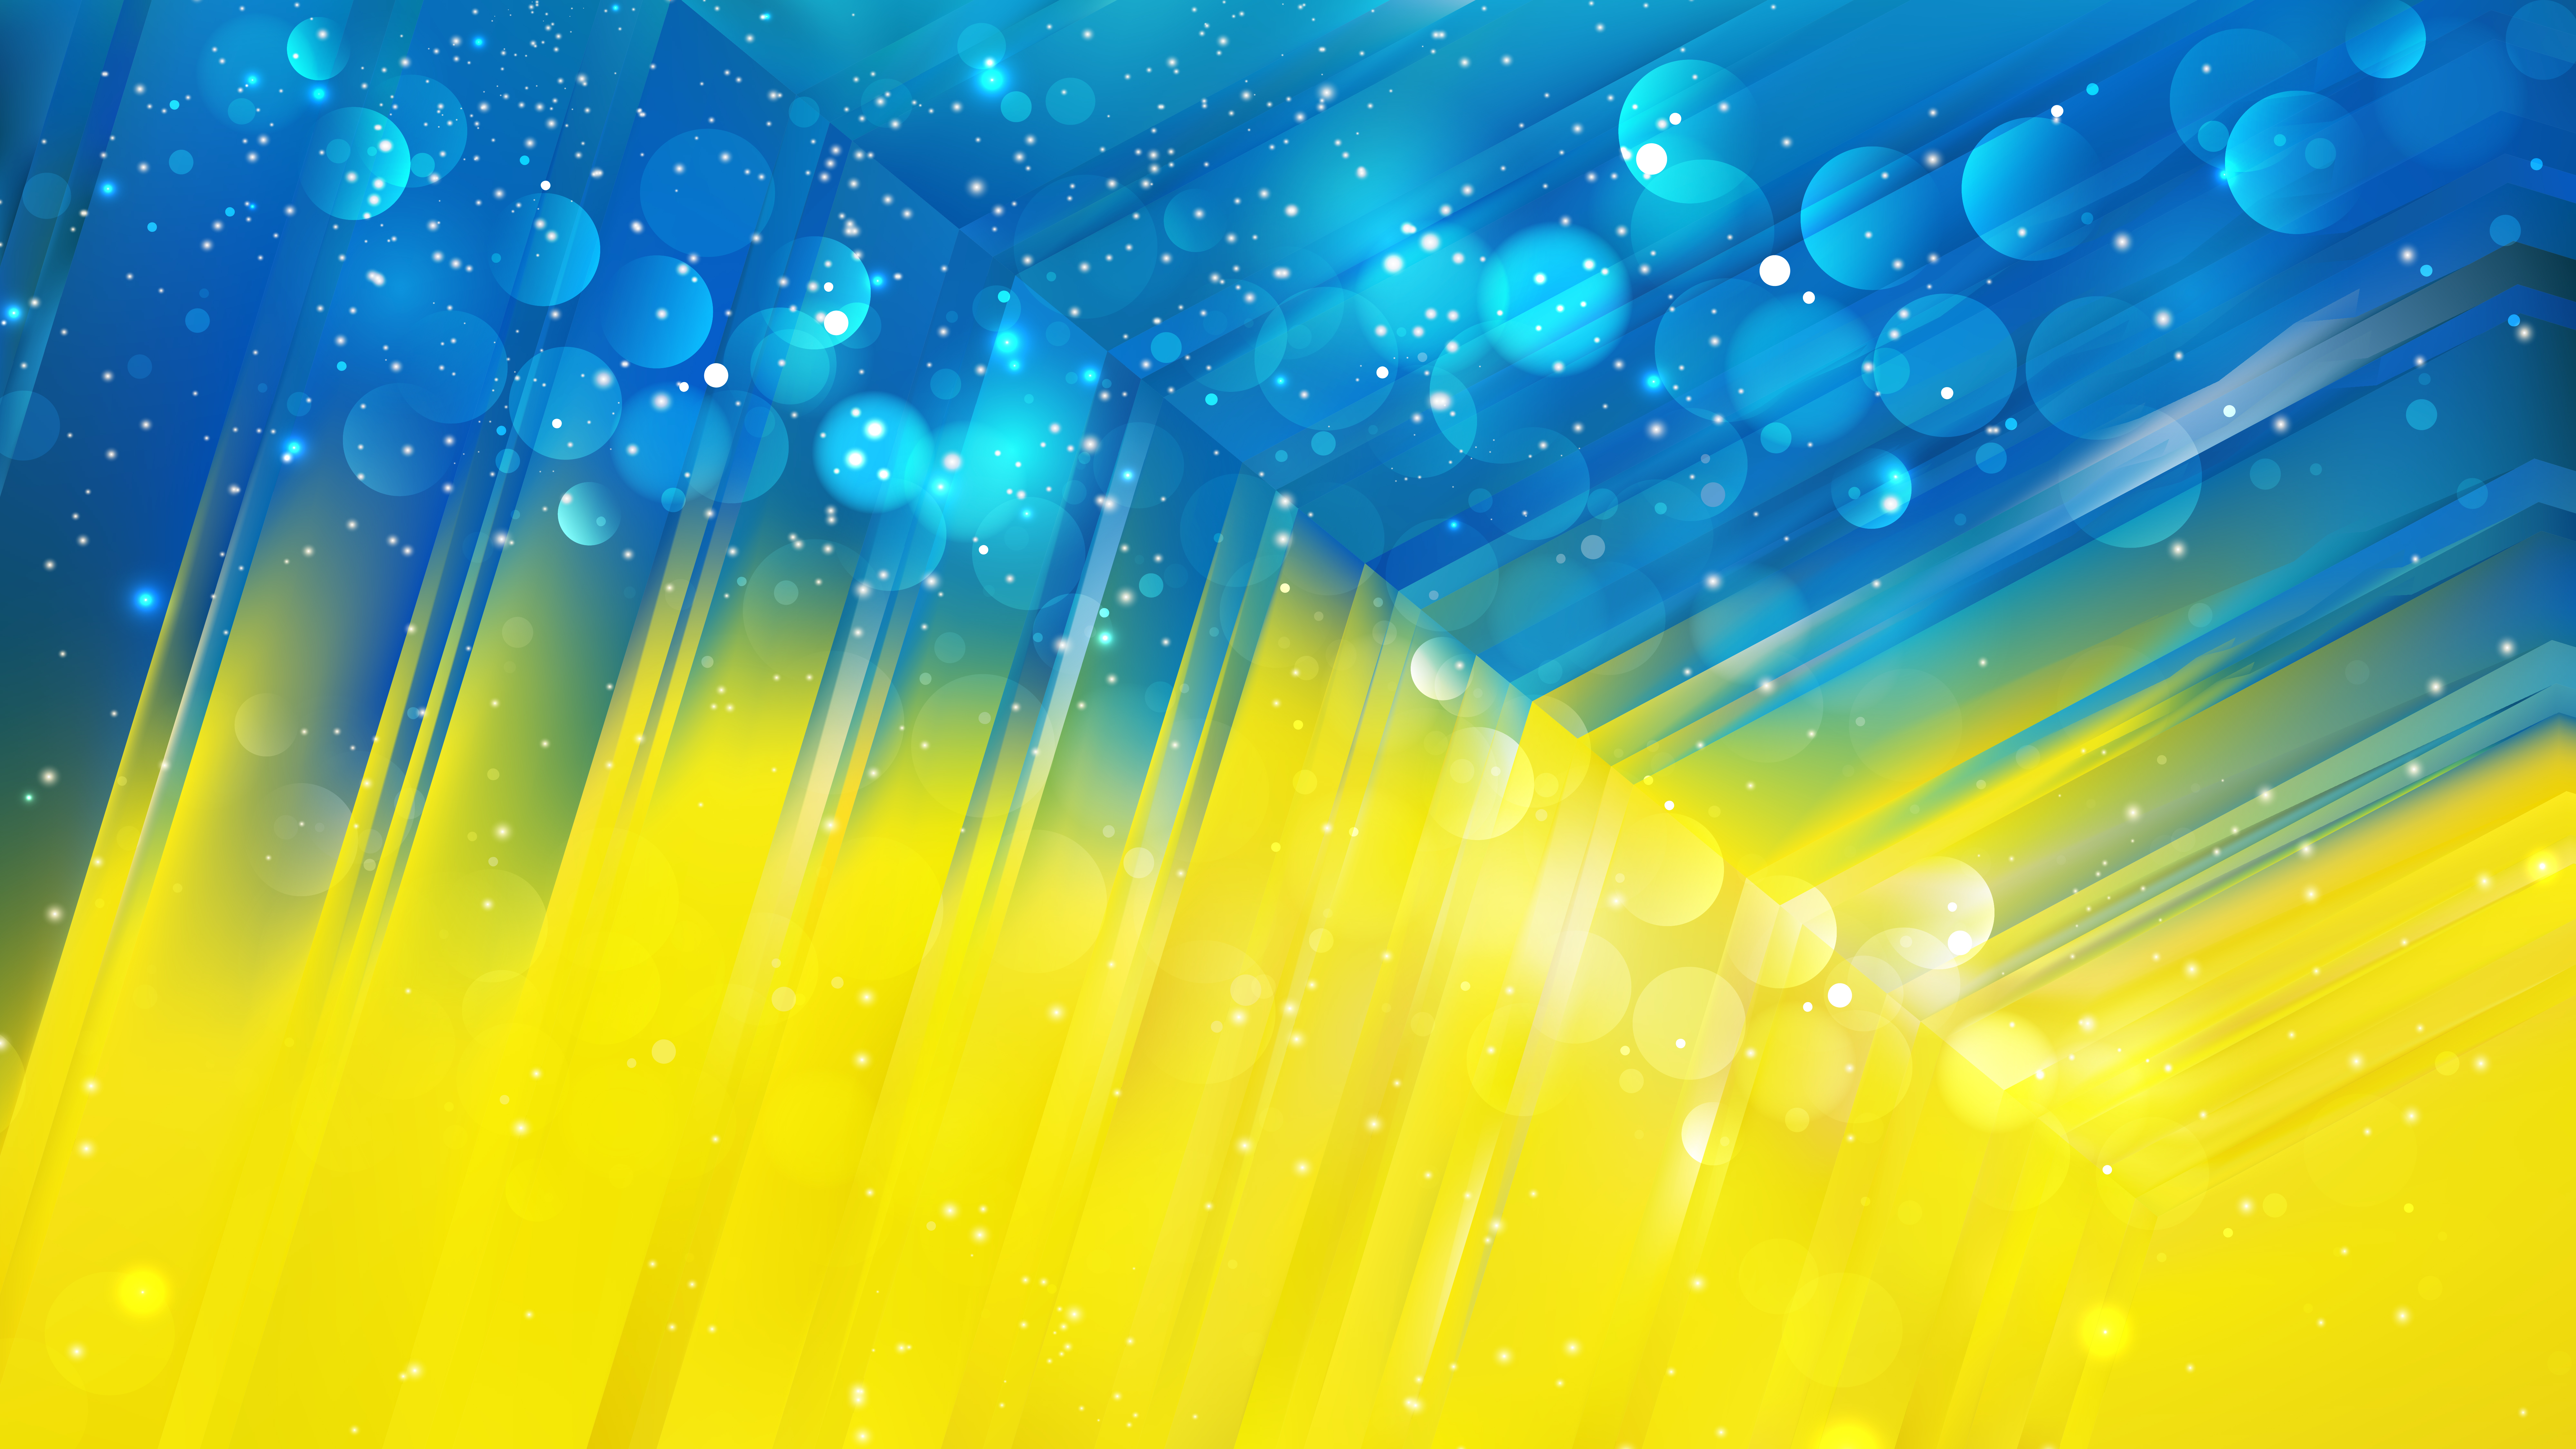 Free Abstract Blue and Yellow Blur Lights Background Image